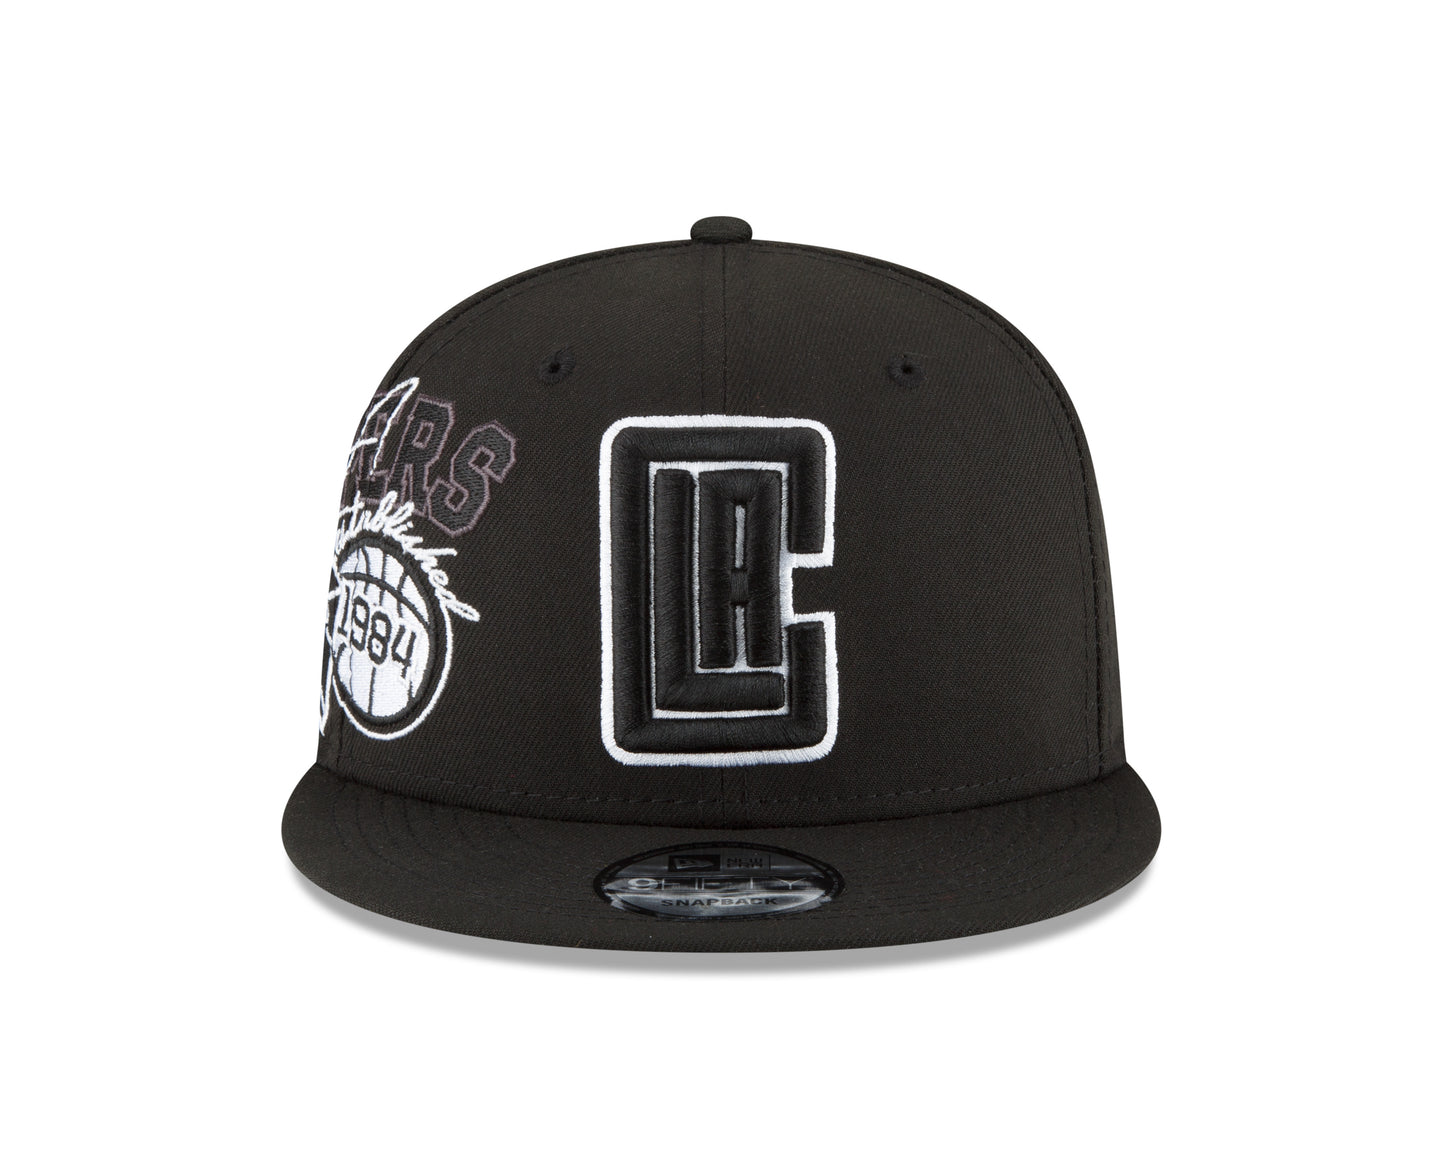 Los Angeles Clippers Black & White Back Half Series 9FIFTY Snap Back Hat